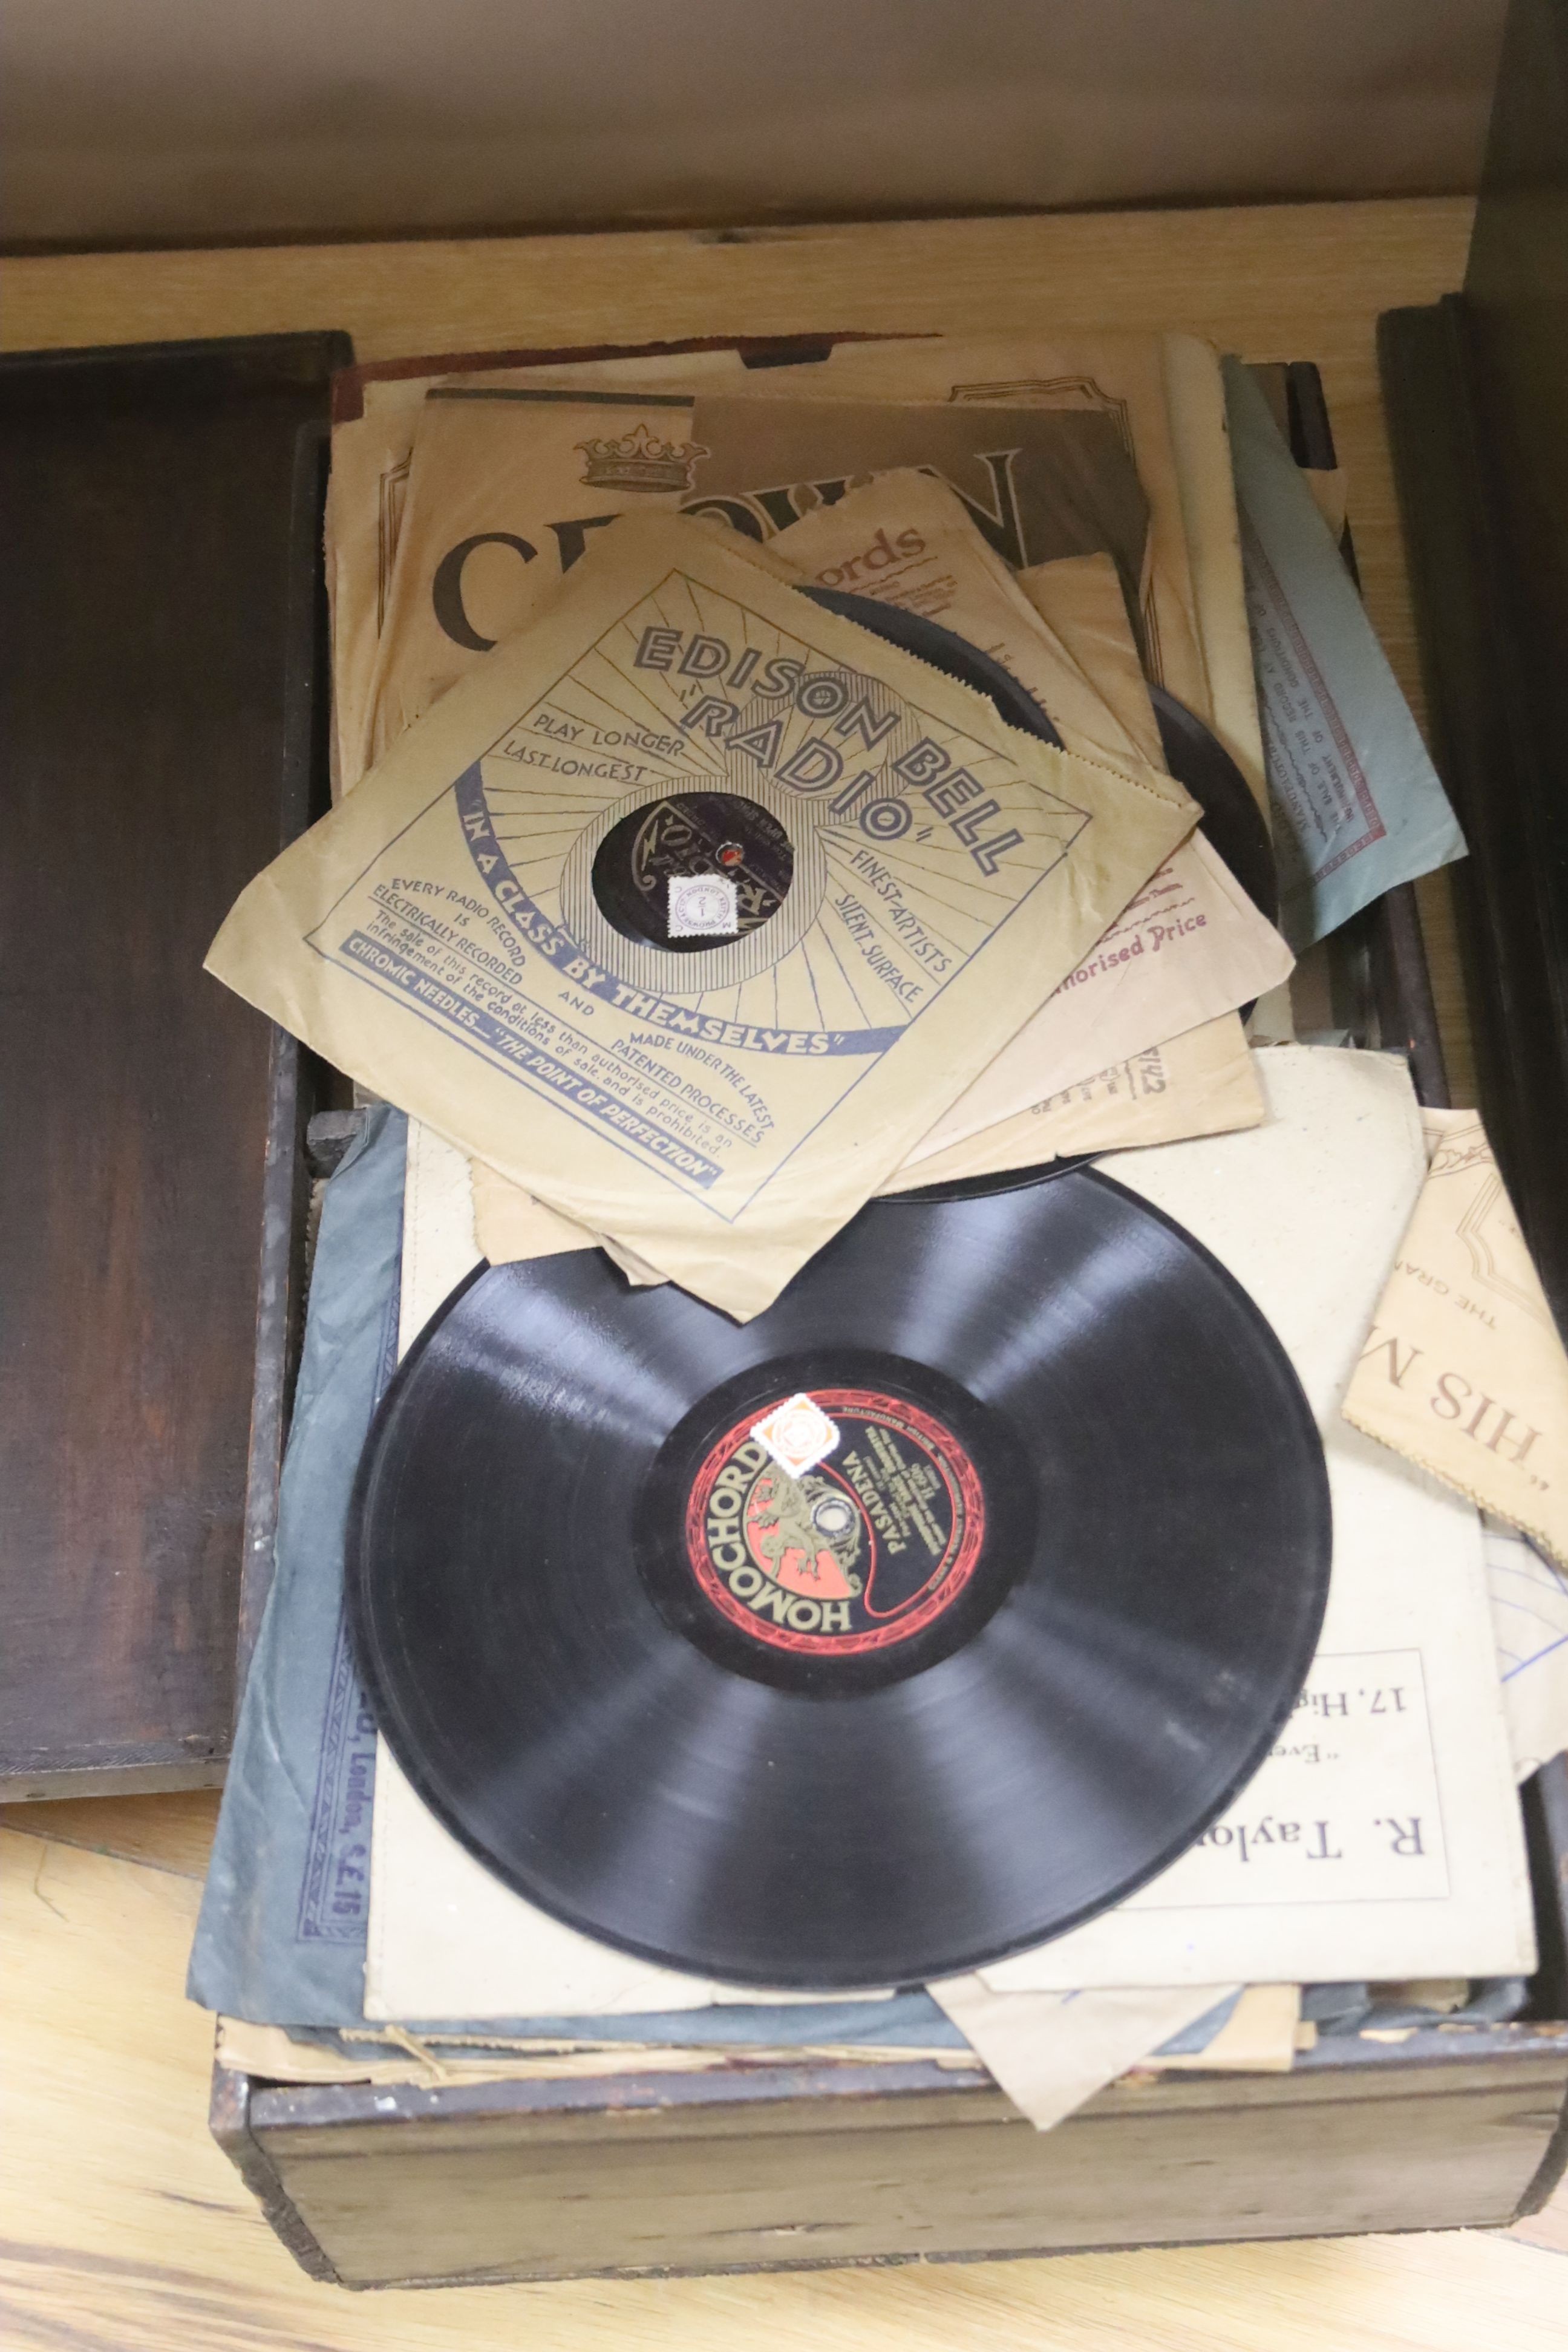 Gramophone Co. Gramola and a quantity of contemporary popular records